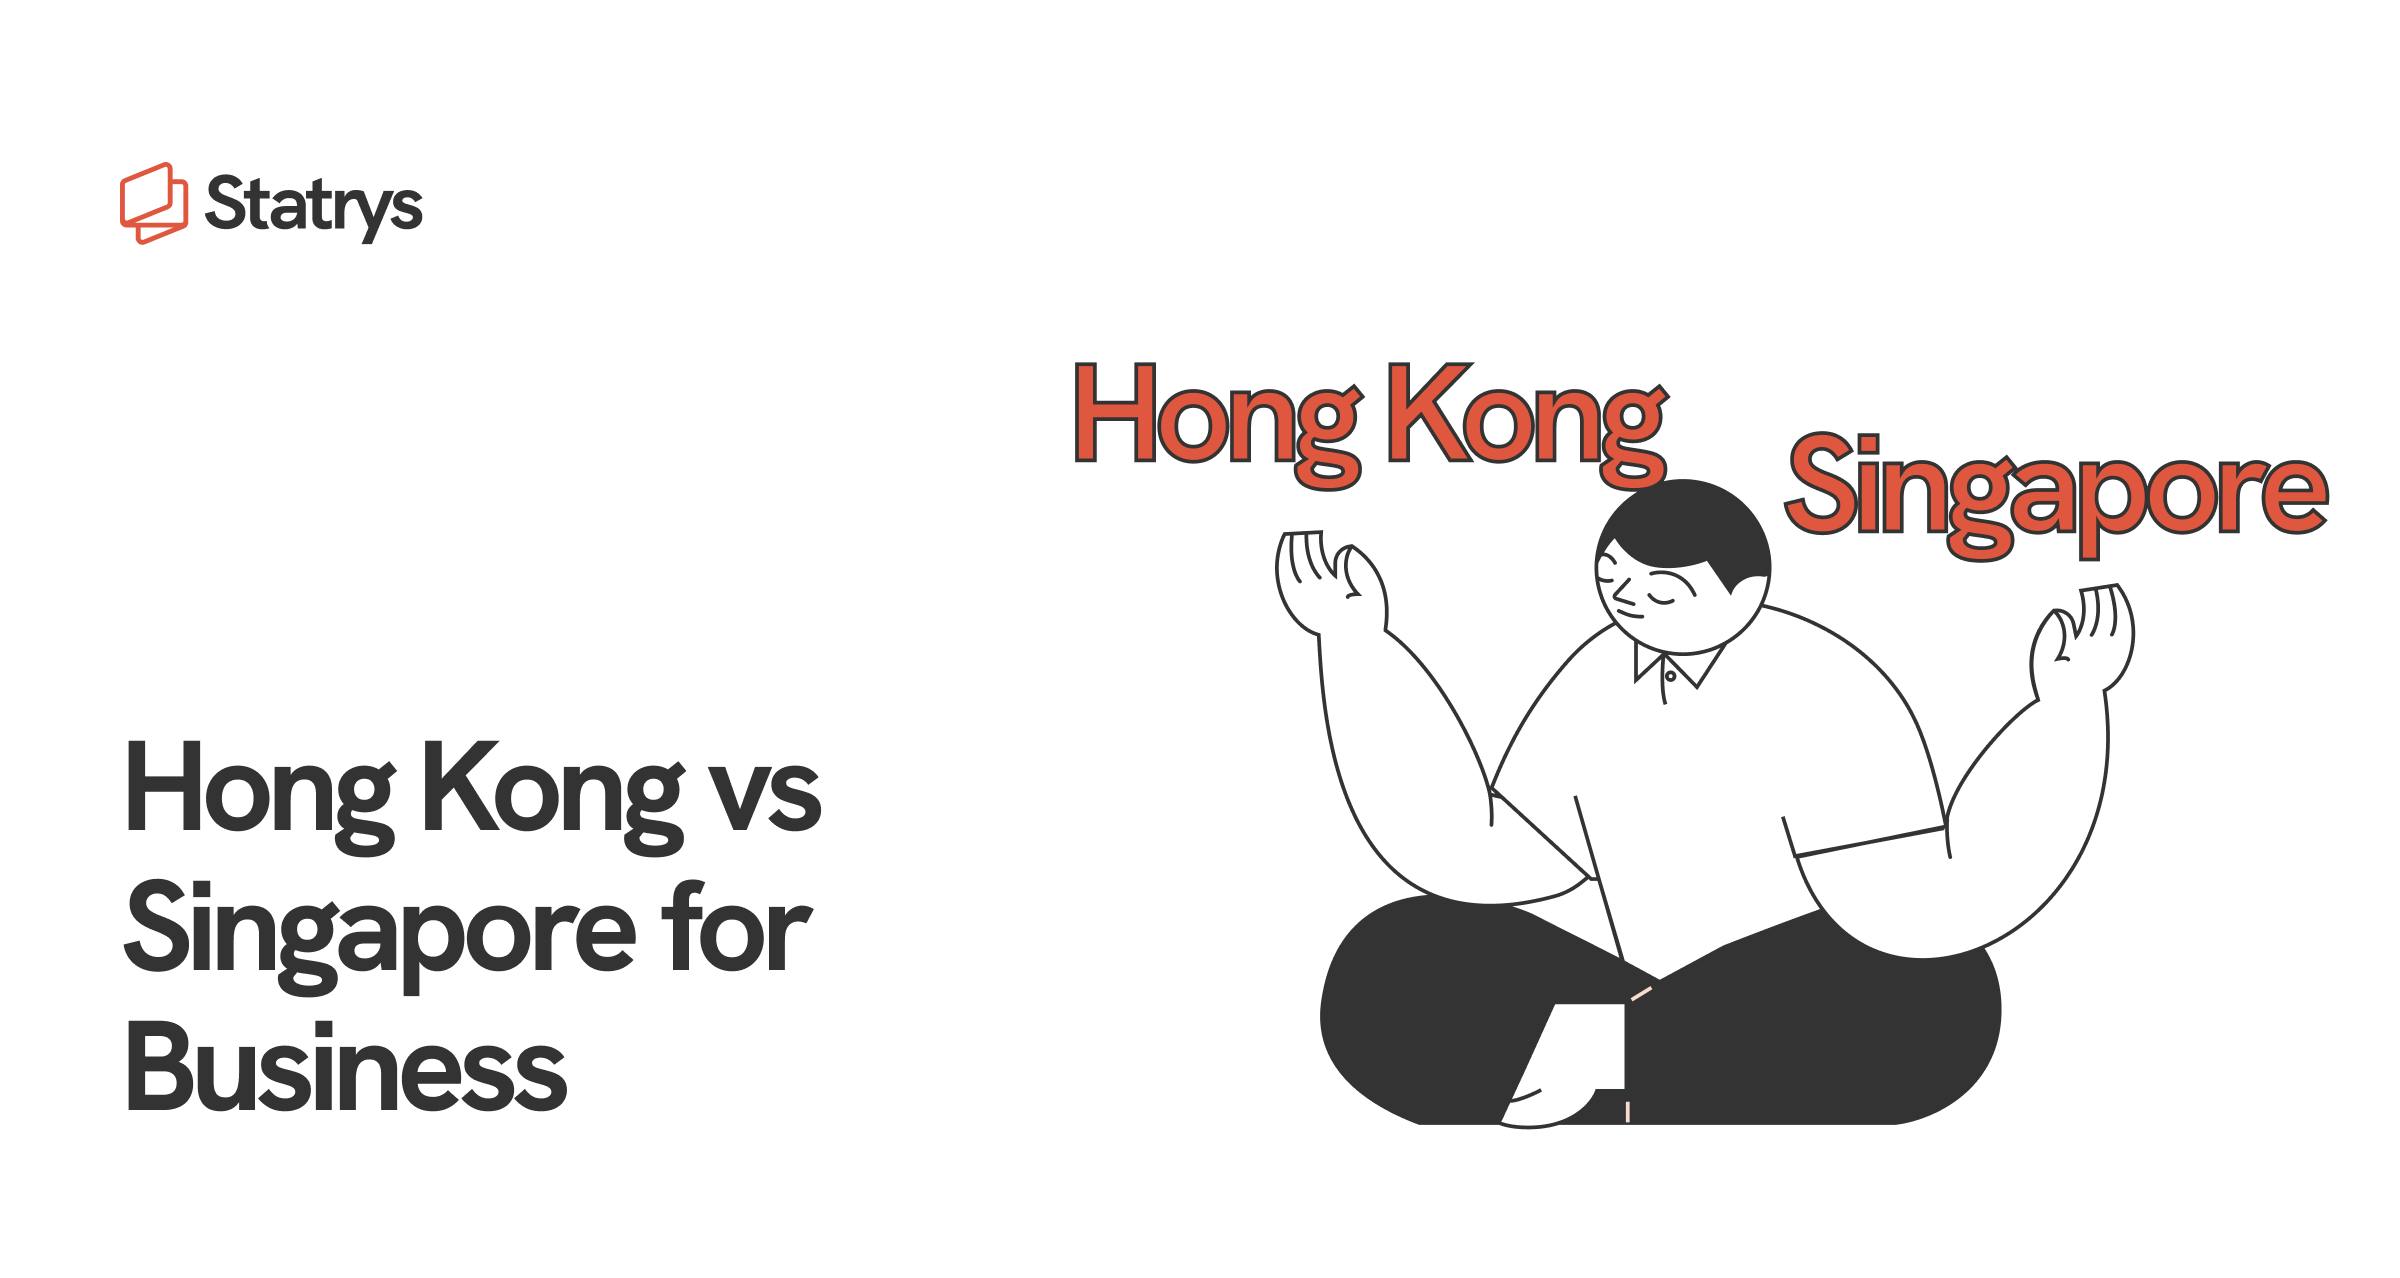 A seated illustrated man comparing Hong Kong and Singapore for business